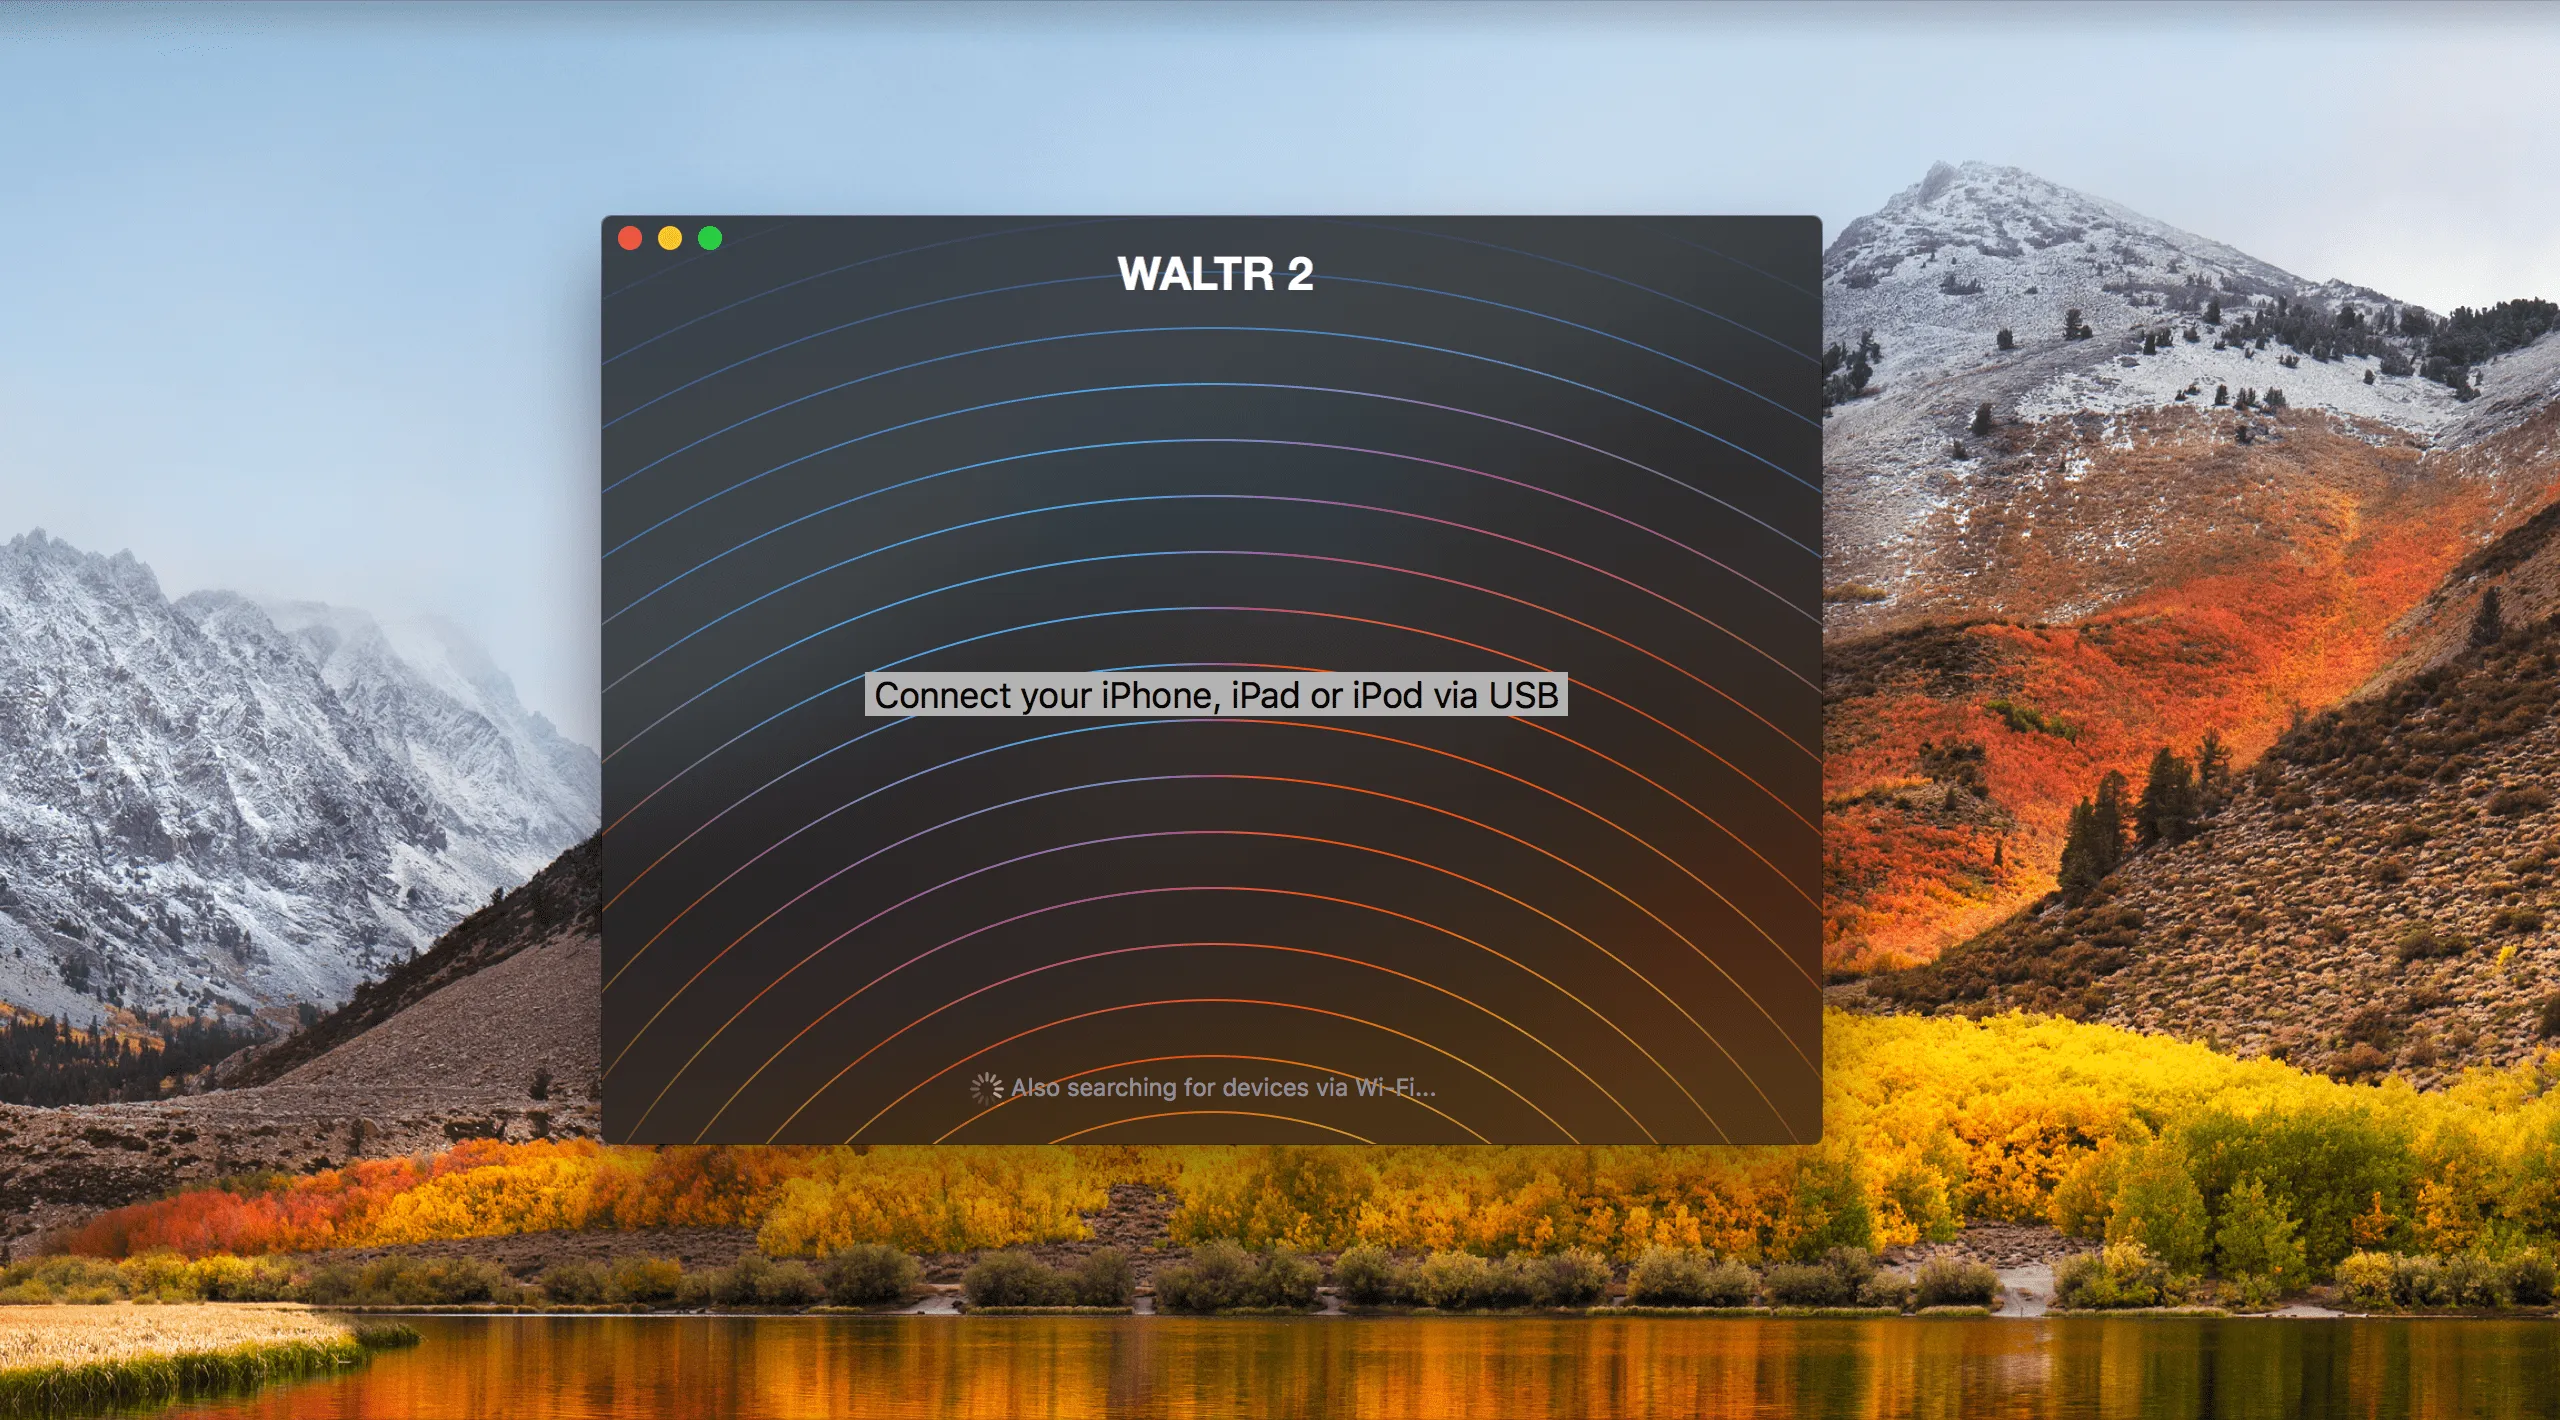 if you can't add music to iPhone, WALTR 2 is a perfect iTunes alternative